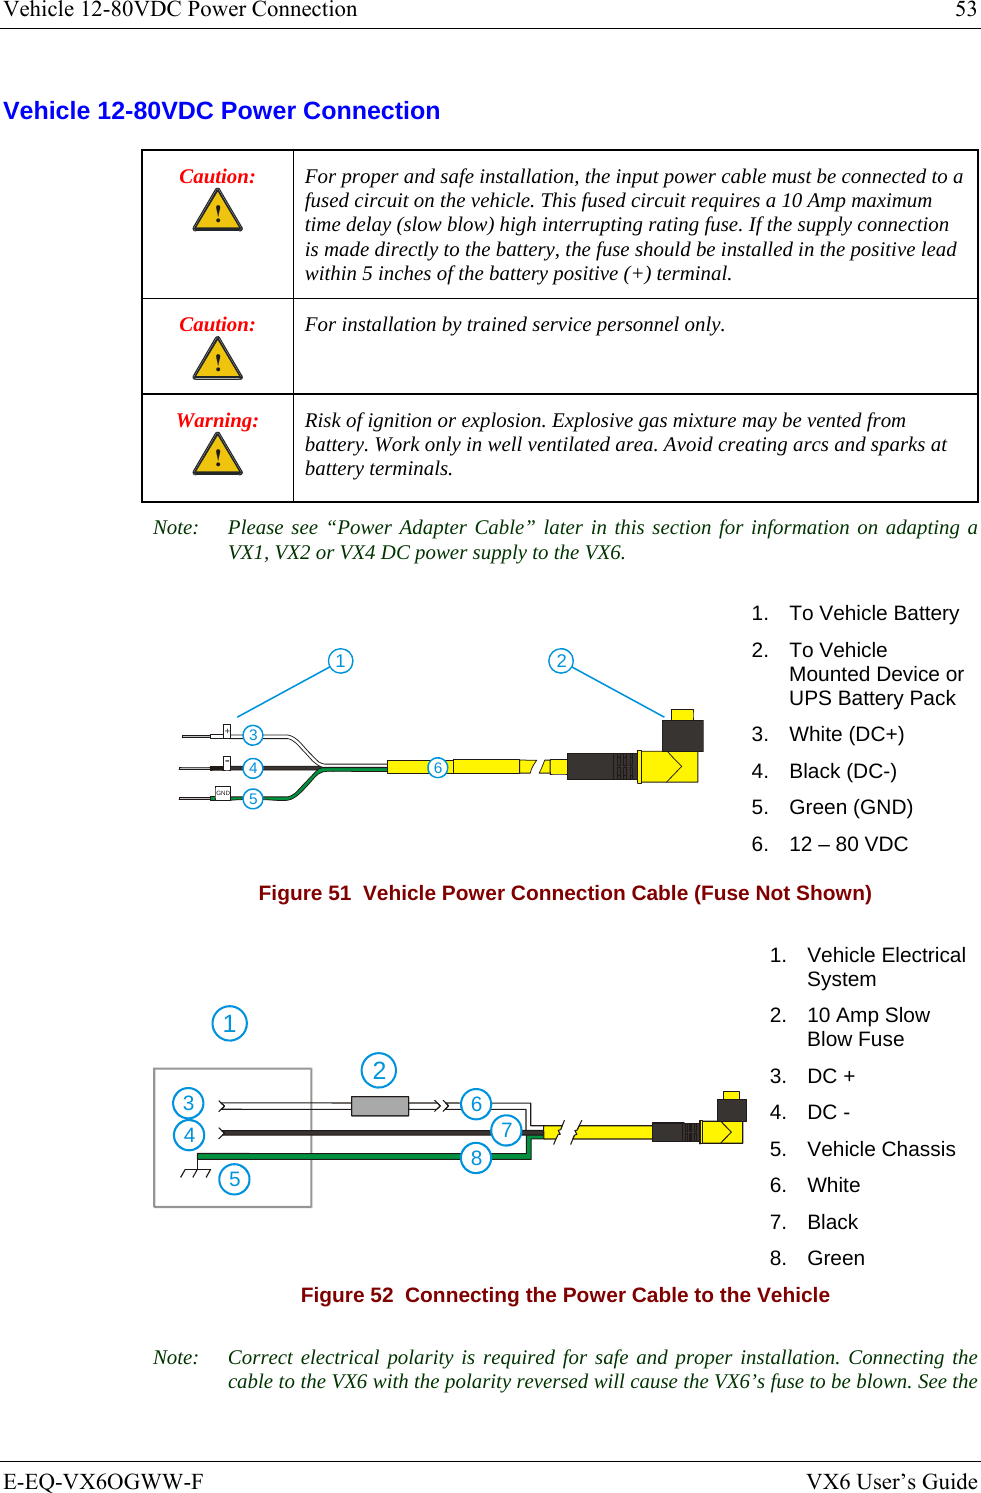 Vehicle 12-80VDC Power Connection  53 E-EQ-VX6OGWW-F  VX6 User’s Guide Vehicle 12-80VDC Power Connection Caution: ! For proper and safe installation, the input power cable must be connected to a fused circuit on the vehicle. This fused circuit requires a 10 Amp maximum time delay (slow blow) high interrupting rating fuse. If the supply connection is made directly to the battery, the fuse should be installed in the positive lead within 5 inches of the battery positive (+) terminal. Caution: ! For installation by trained service personnel only. Warning: ! Risk of ignition or explosion. Explosive gas mixture may be vented from battery. Work only in well ventilated area. Avoid creating arcs and sparks at battery terminals. Note:  Please see “Power Adapter Cable” later in this section for information on adapting a VX1, VX2 or VX4 DC power supply to the VX6. GND+-34561 2 1.  To Vehicle Battery 2. To Vehicle Mounted Device or UPS Battery Pack 3. White (DC+) 4. Black (DC-) 5. Green (GND) 6.  12 – 80 VDC Figure 51  Vehicle Power Connection Cable (Fuse Not Shown) 54321678 1.   Vehicle Electrical System 2.   10 Amp Slow Blow Fuse 3.   DC + 4.   DC - 5.   Vehicle Chassis 6.   White 7.   Black 8.   Green Figure 52  Connecting the Power Cable to the Vehicle Note:  Correct electrical polarity is required for safe and proper installation. Connecting the cable to the VX6 with the polarity reversed will cause the VX6’s fuse to be blown. See the 